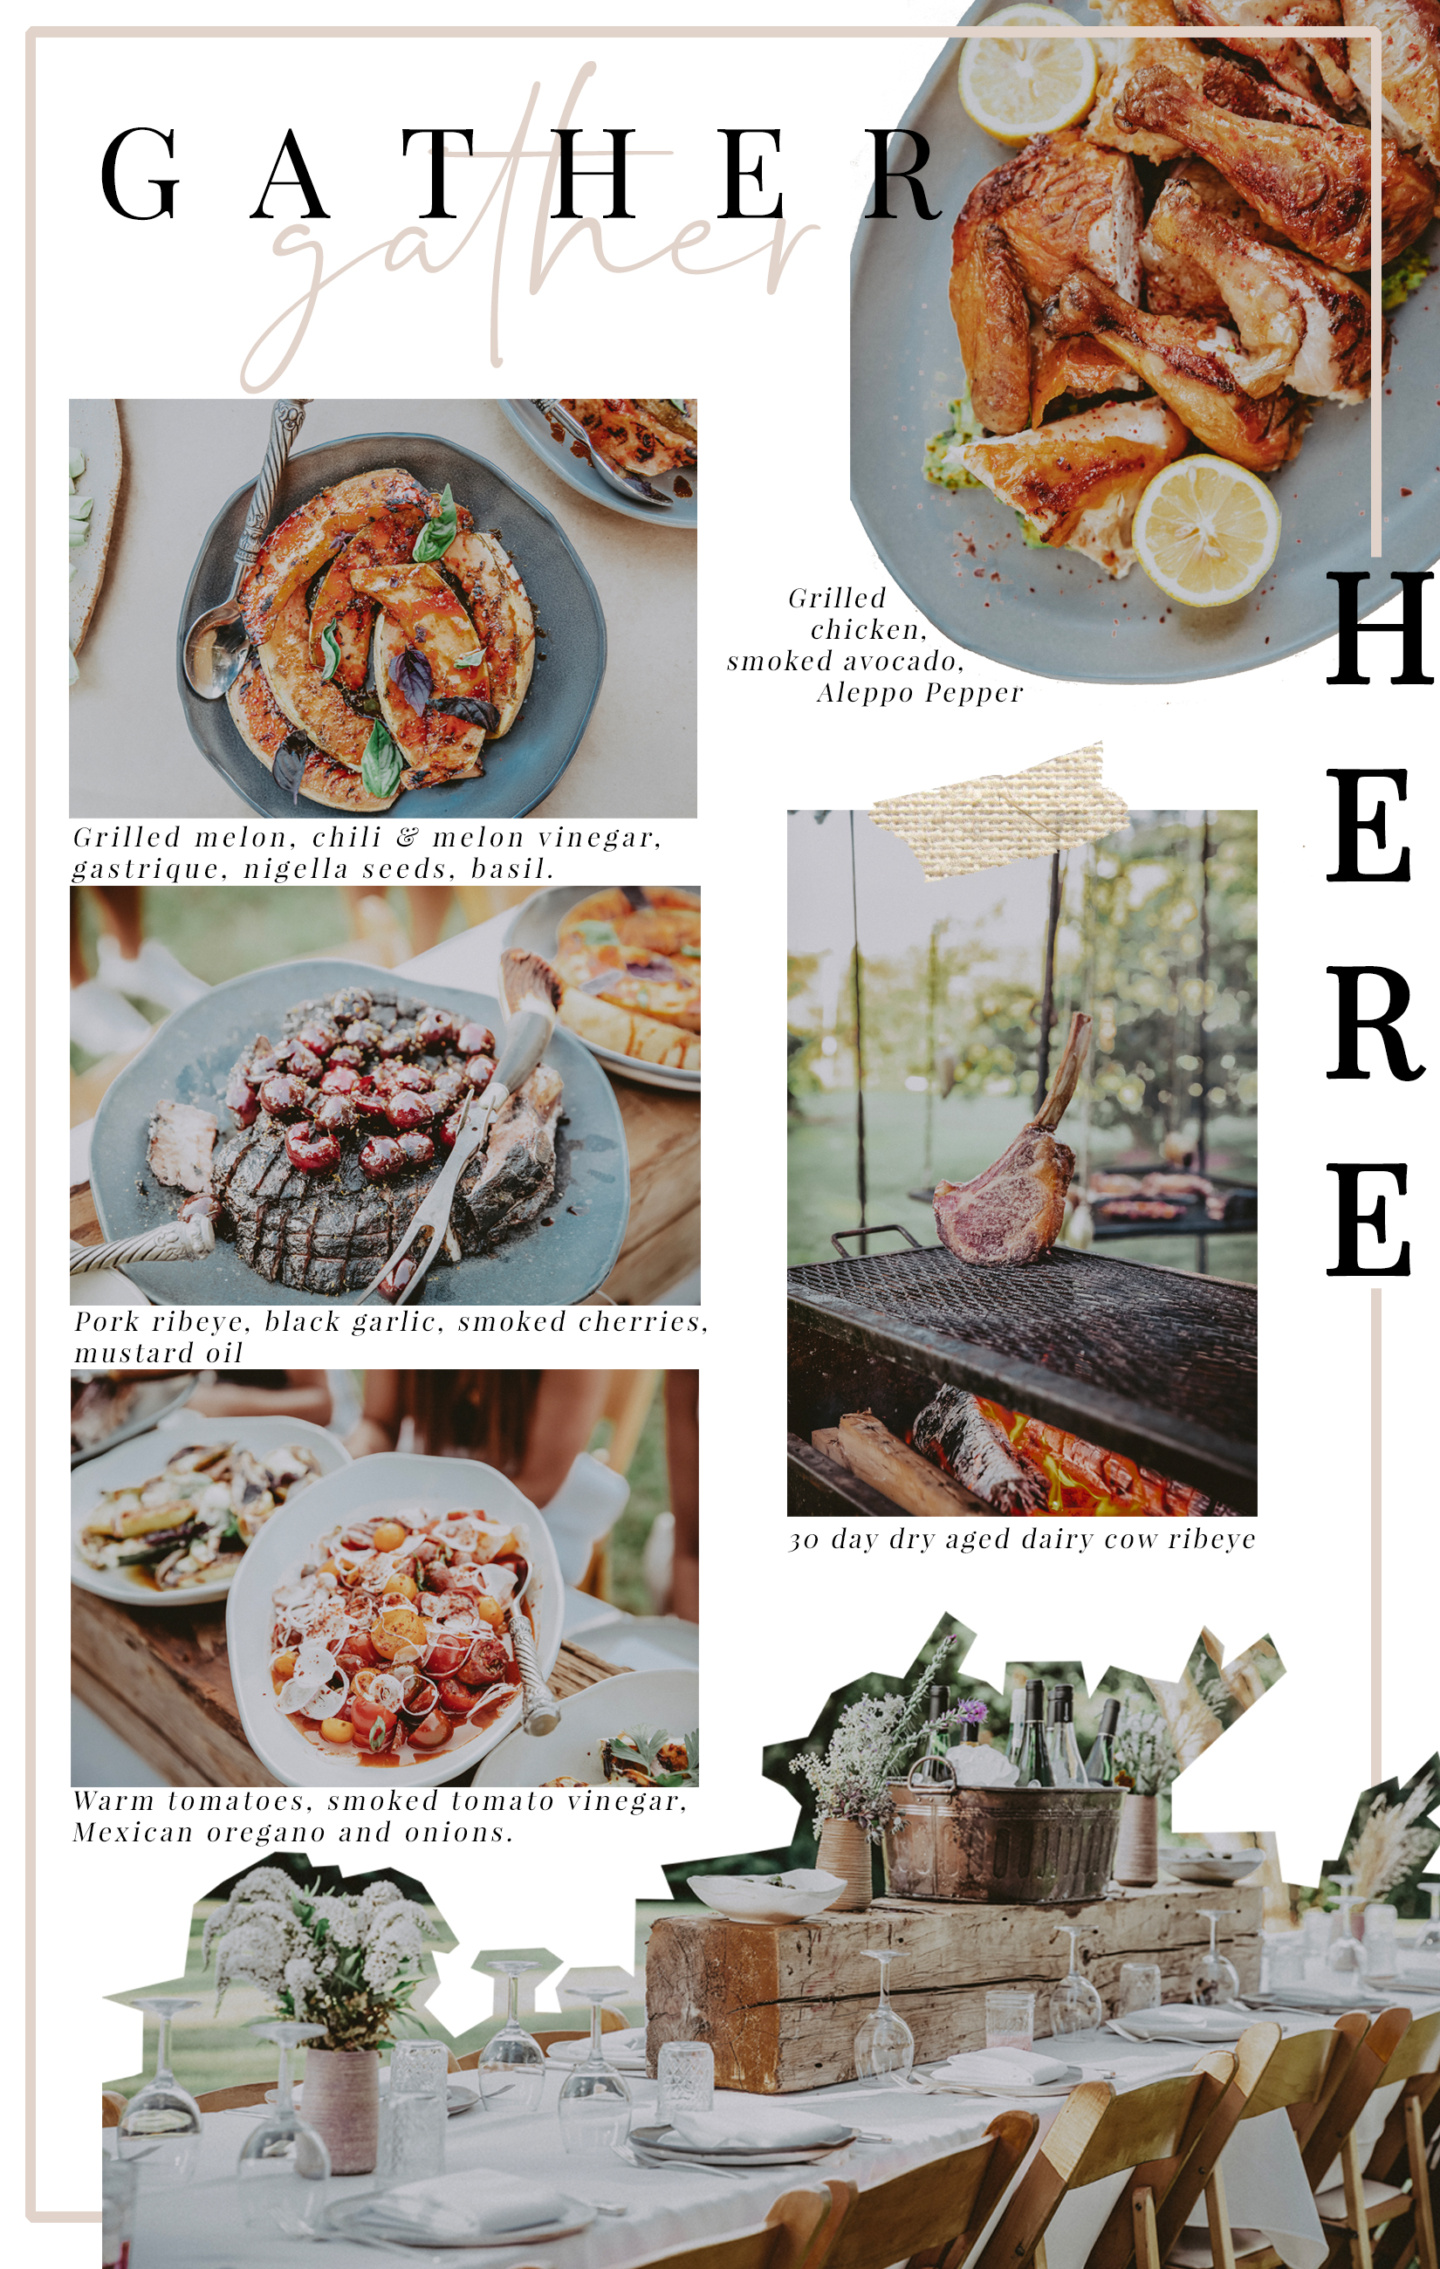 Wood Fire Food: A Top-Notch Connecting Opportunity In Westchester - Simply by Simone - Simone Piliero - Westchester County - Pop Up Dinner - Event - Summer #dinner #food #magazine #gatherhere #photoshop #westchester #newyork #summer #dining #tablescape